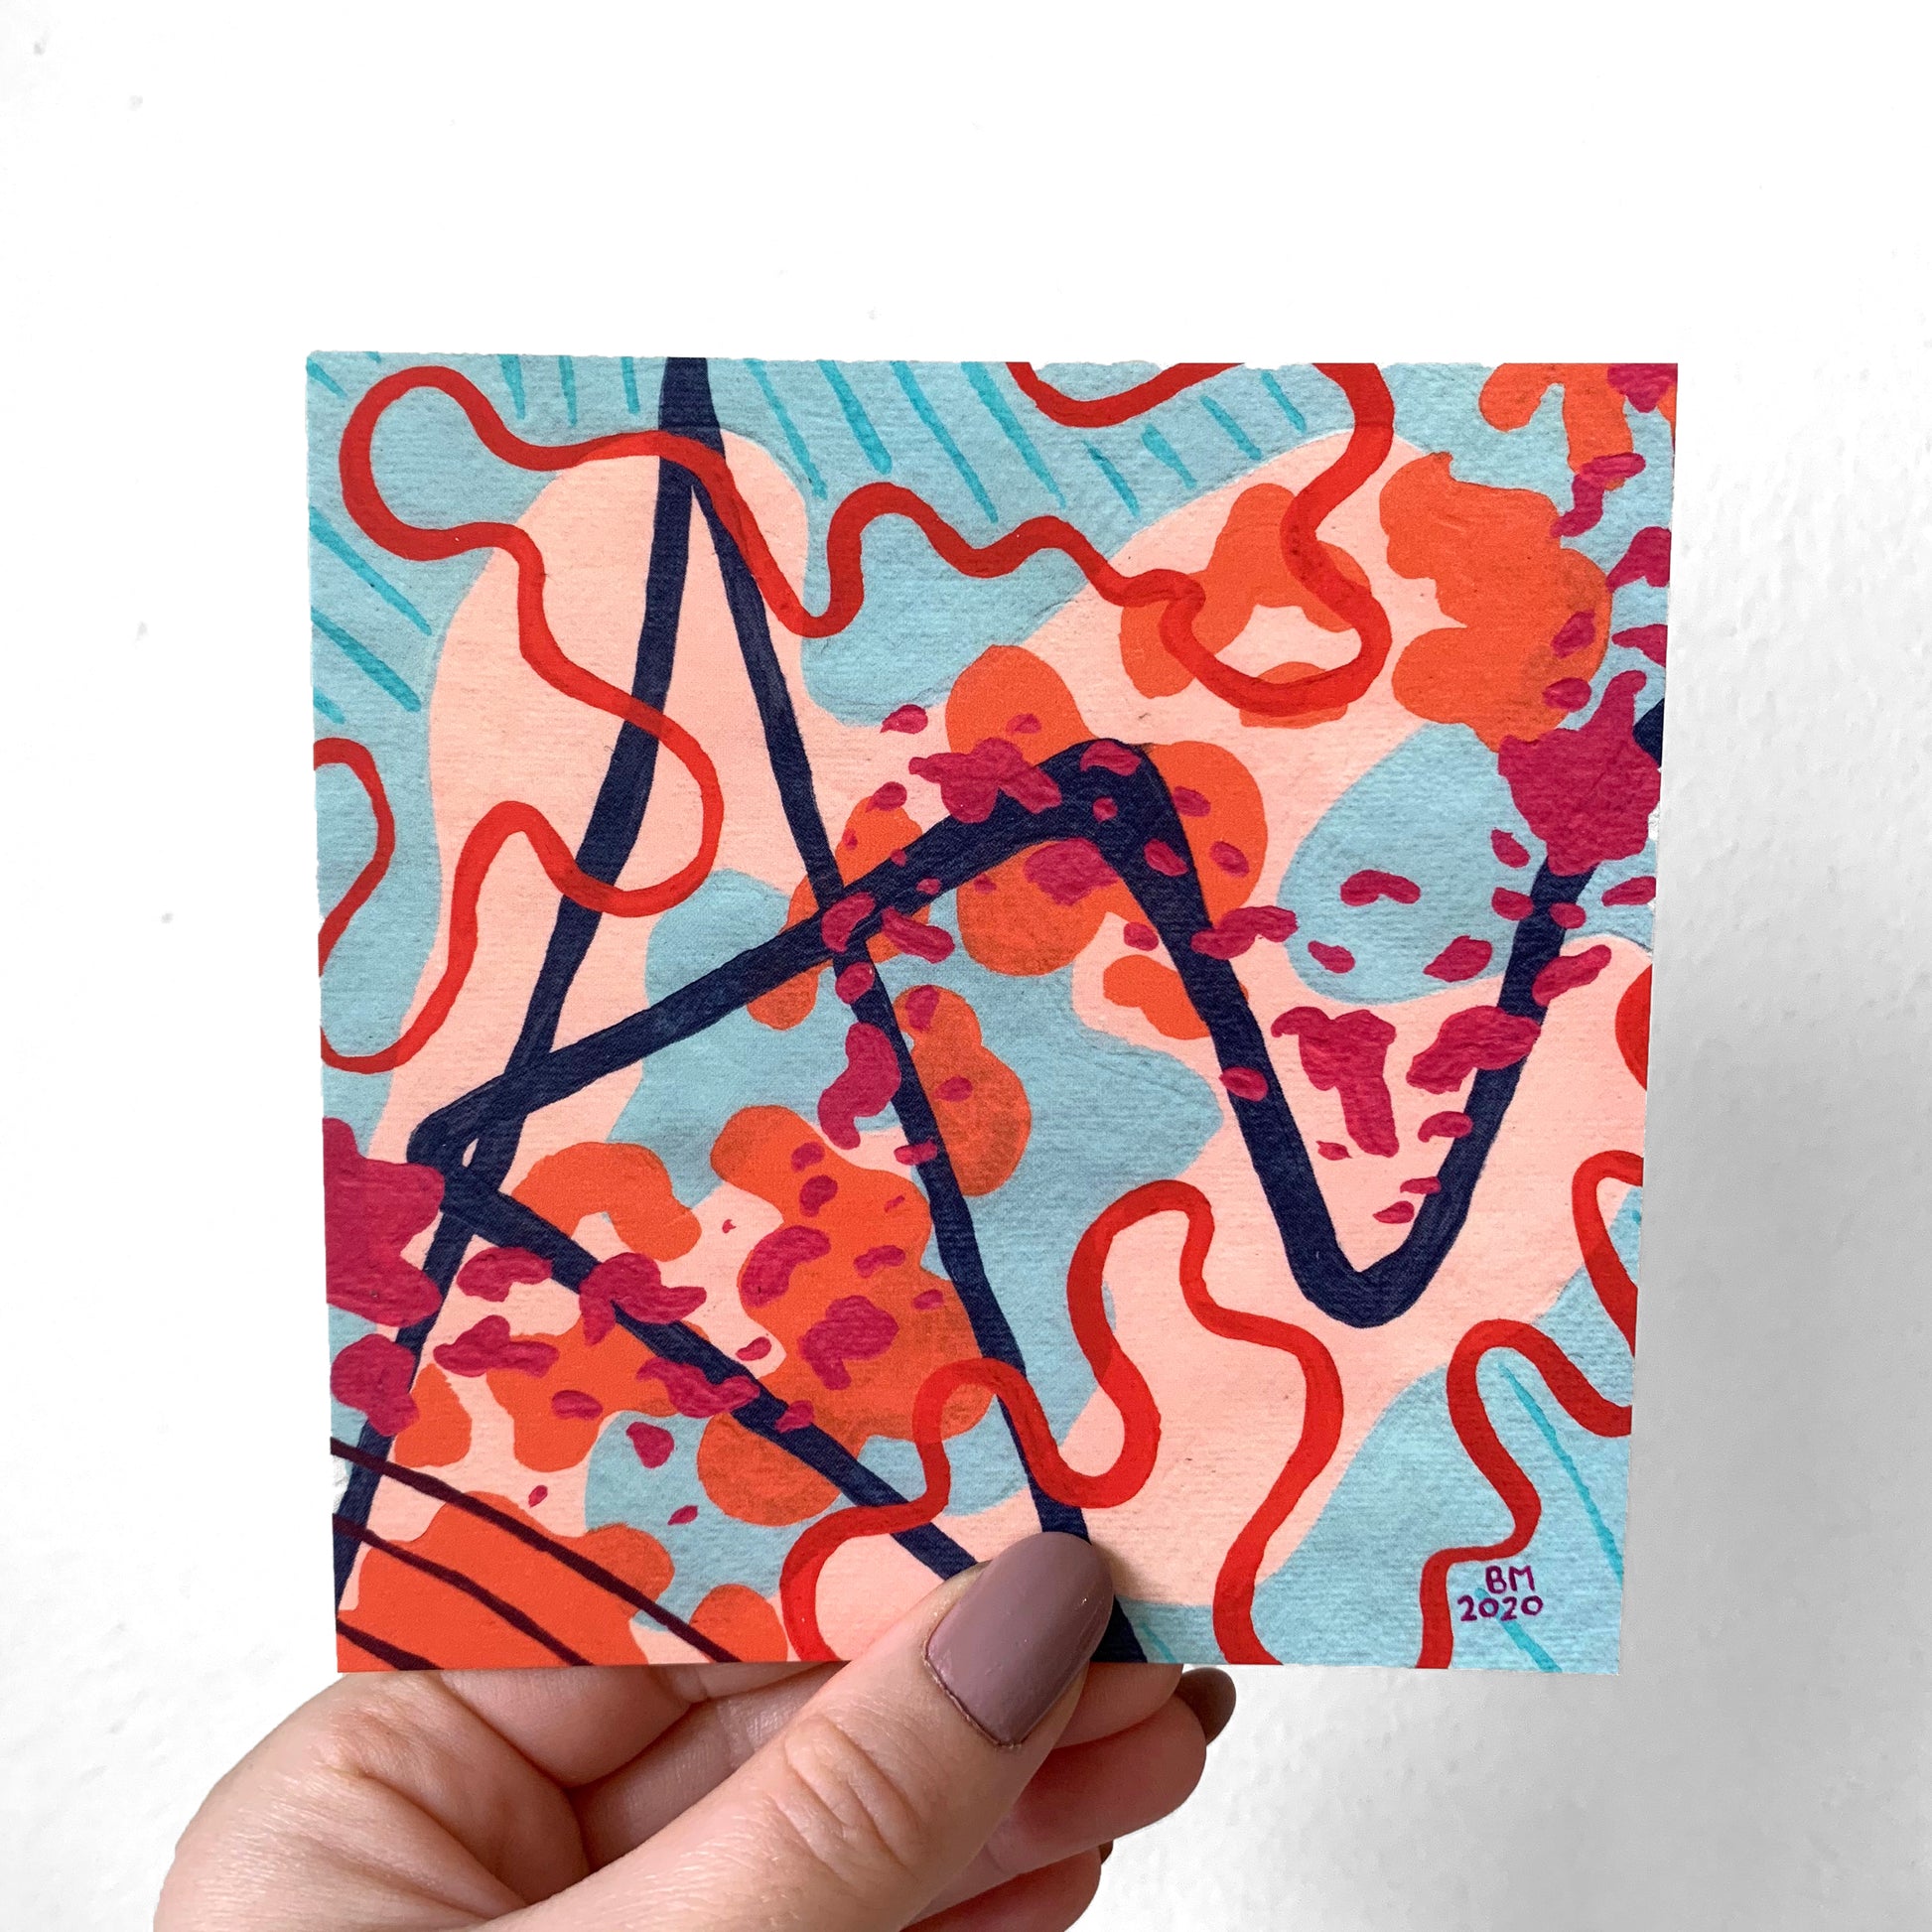 A hand holding a print of an abstract painting against a white background. The painting is made up of shades of blue and orange, and has pink shapes cutting across the diagonal along with a navy sharp line and red swirling lines. 